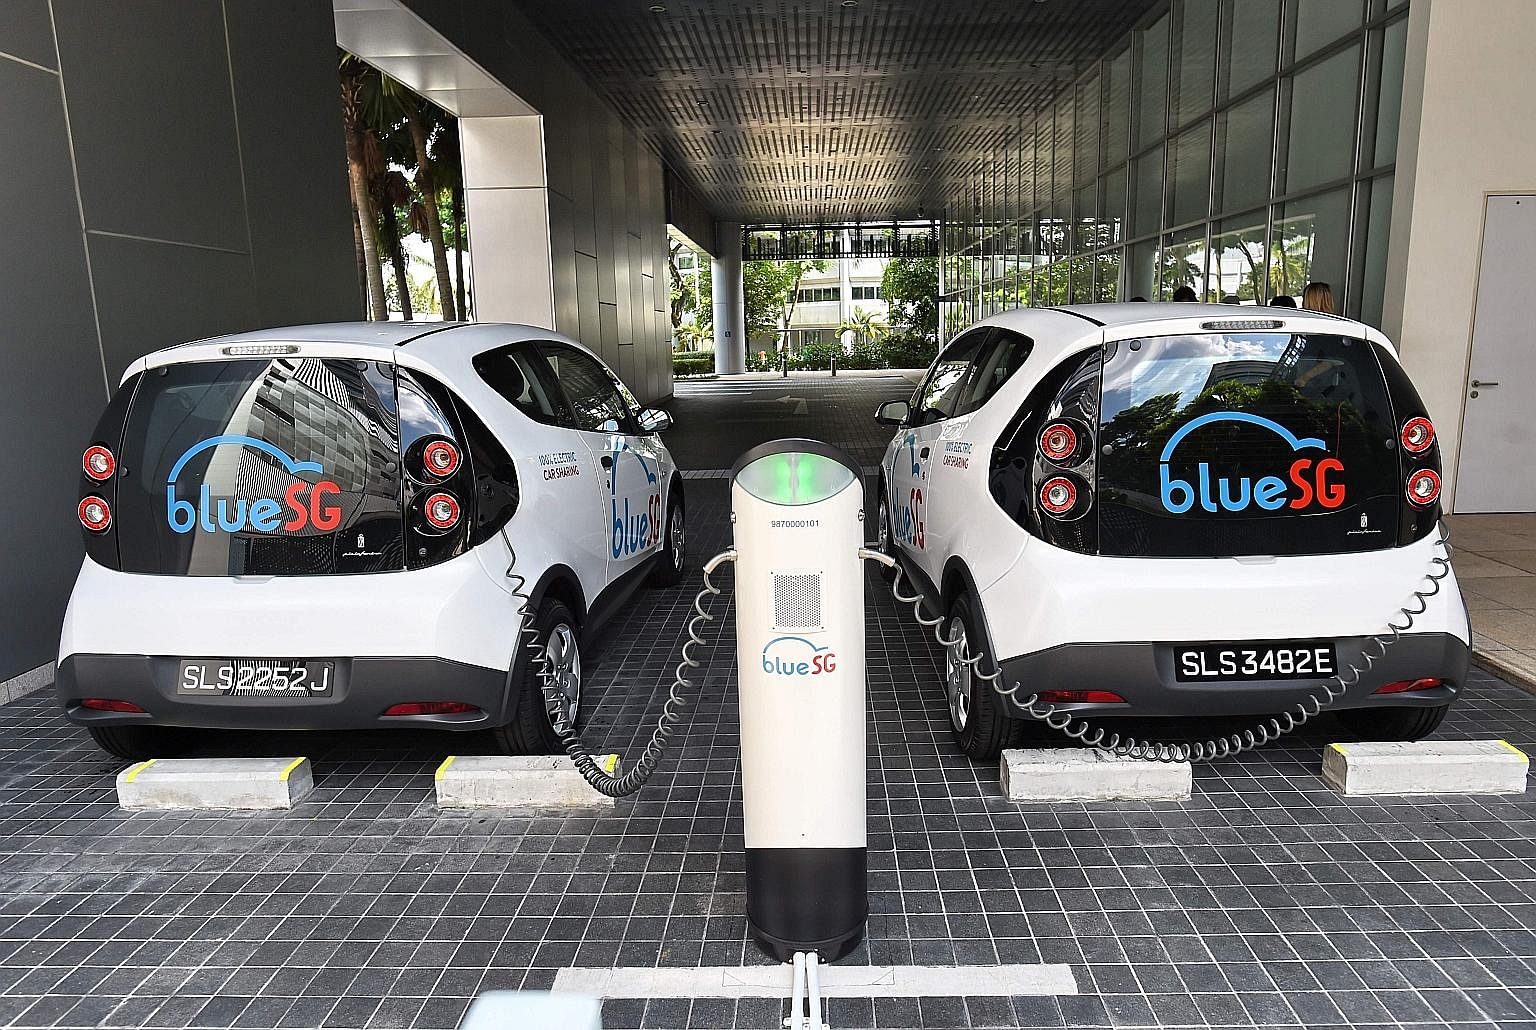 BlueSG aims to grow its fleet of electric vehicles to about 1,000 and have 2,000 charging points by 2020. Users can book a vehicle via a mobile app, pick the car up at a charging station and return it at a station that is nearest to their destination